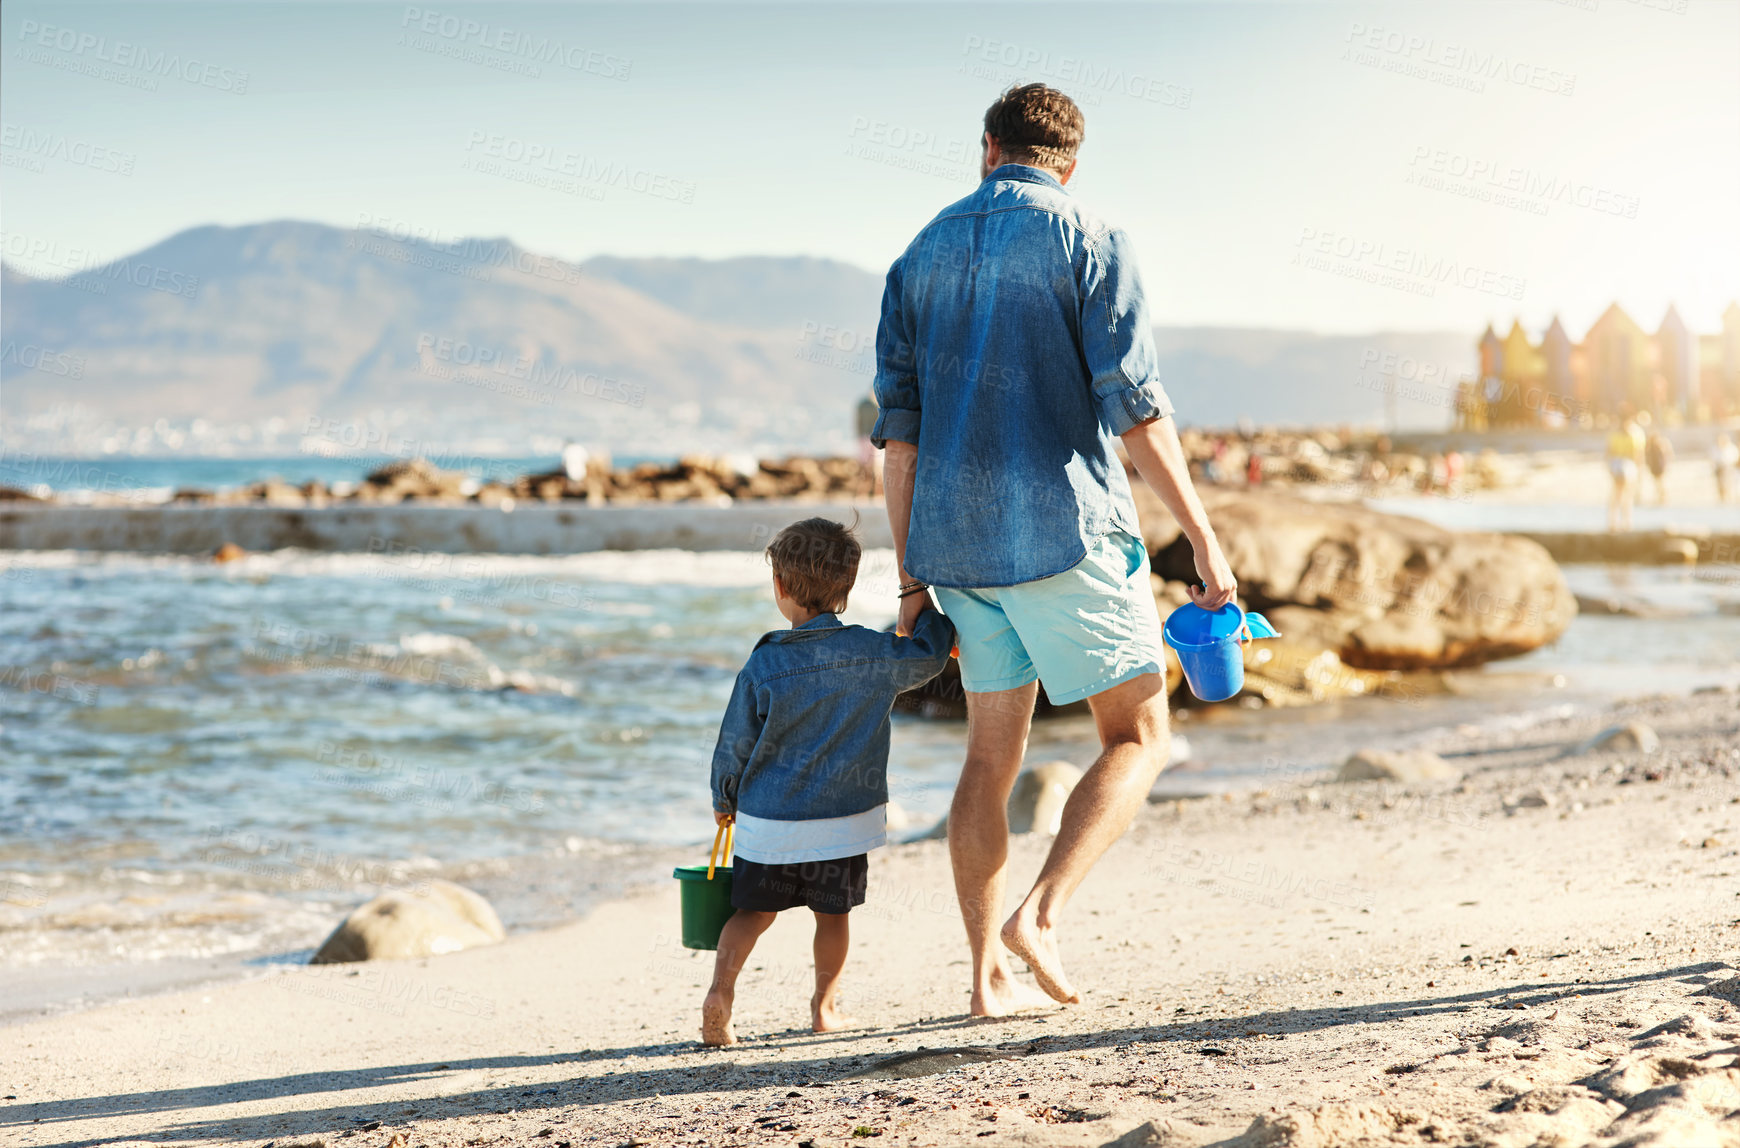 Buy stock photo Rearview shot of a father and his little son bonding together at the beach